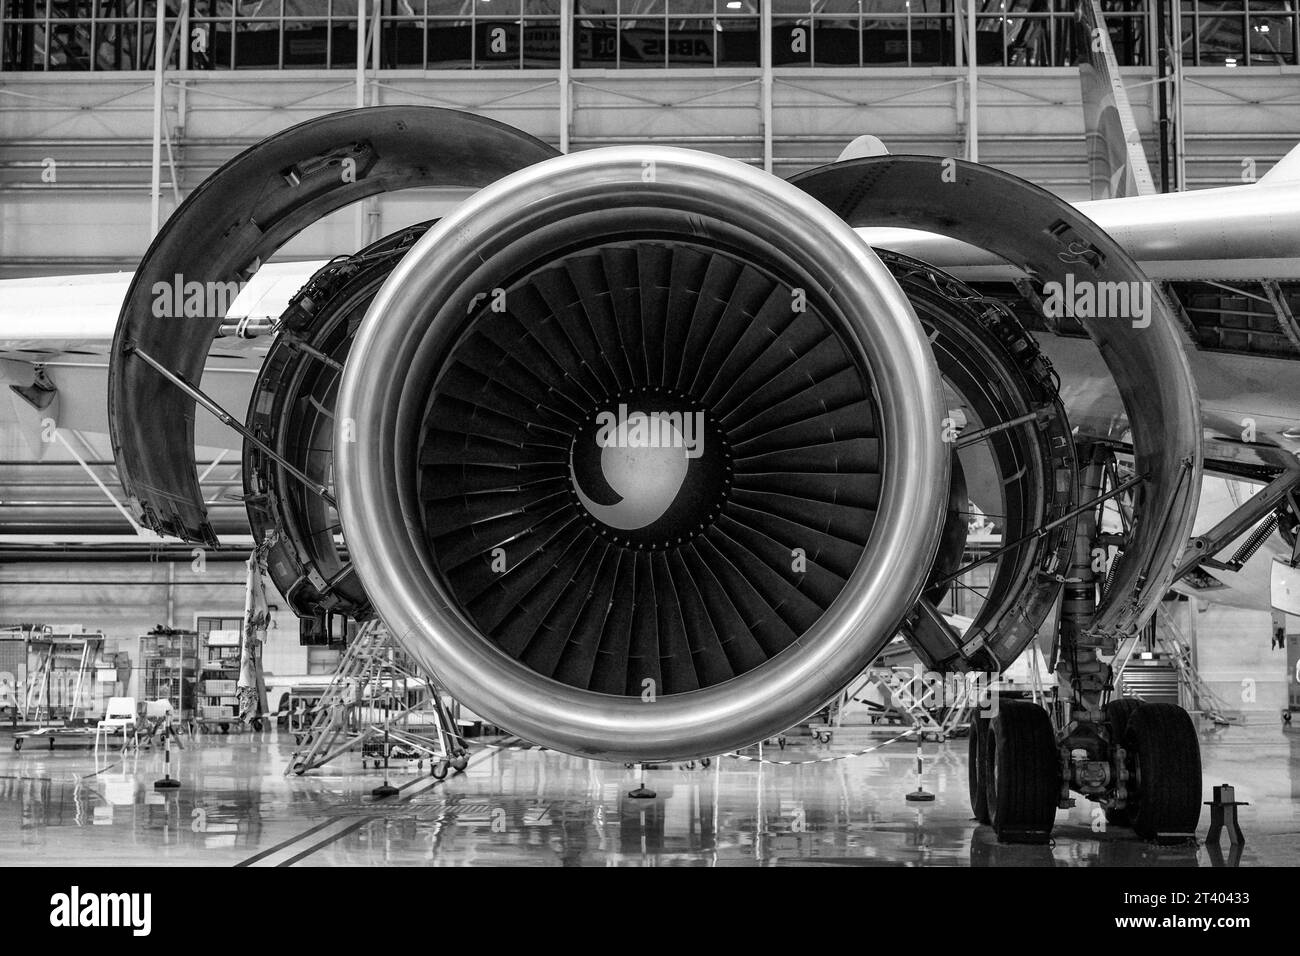 Close-up shot of an airplane's disassembled turbine in the hangar. Disassembly and repair are in progress.Front view. Black and white. Stock Photo